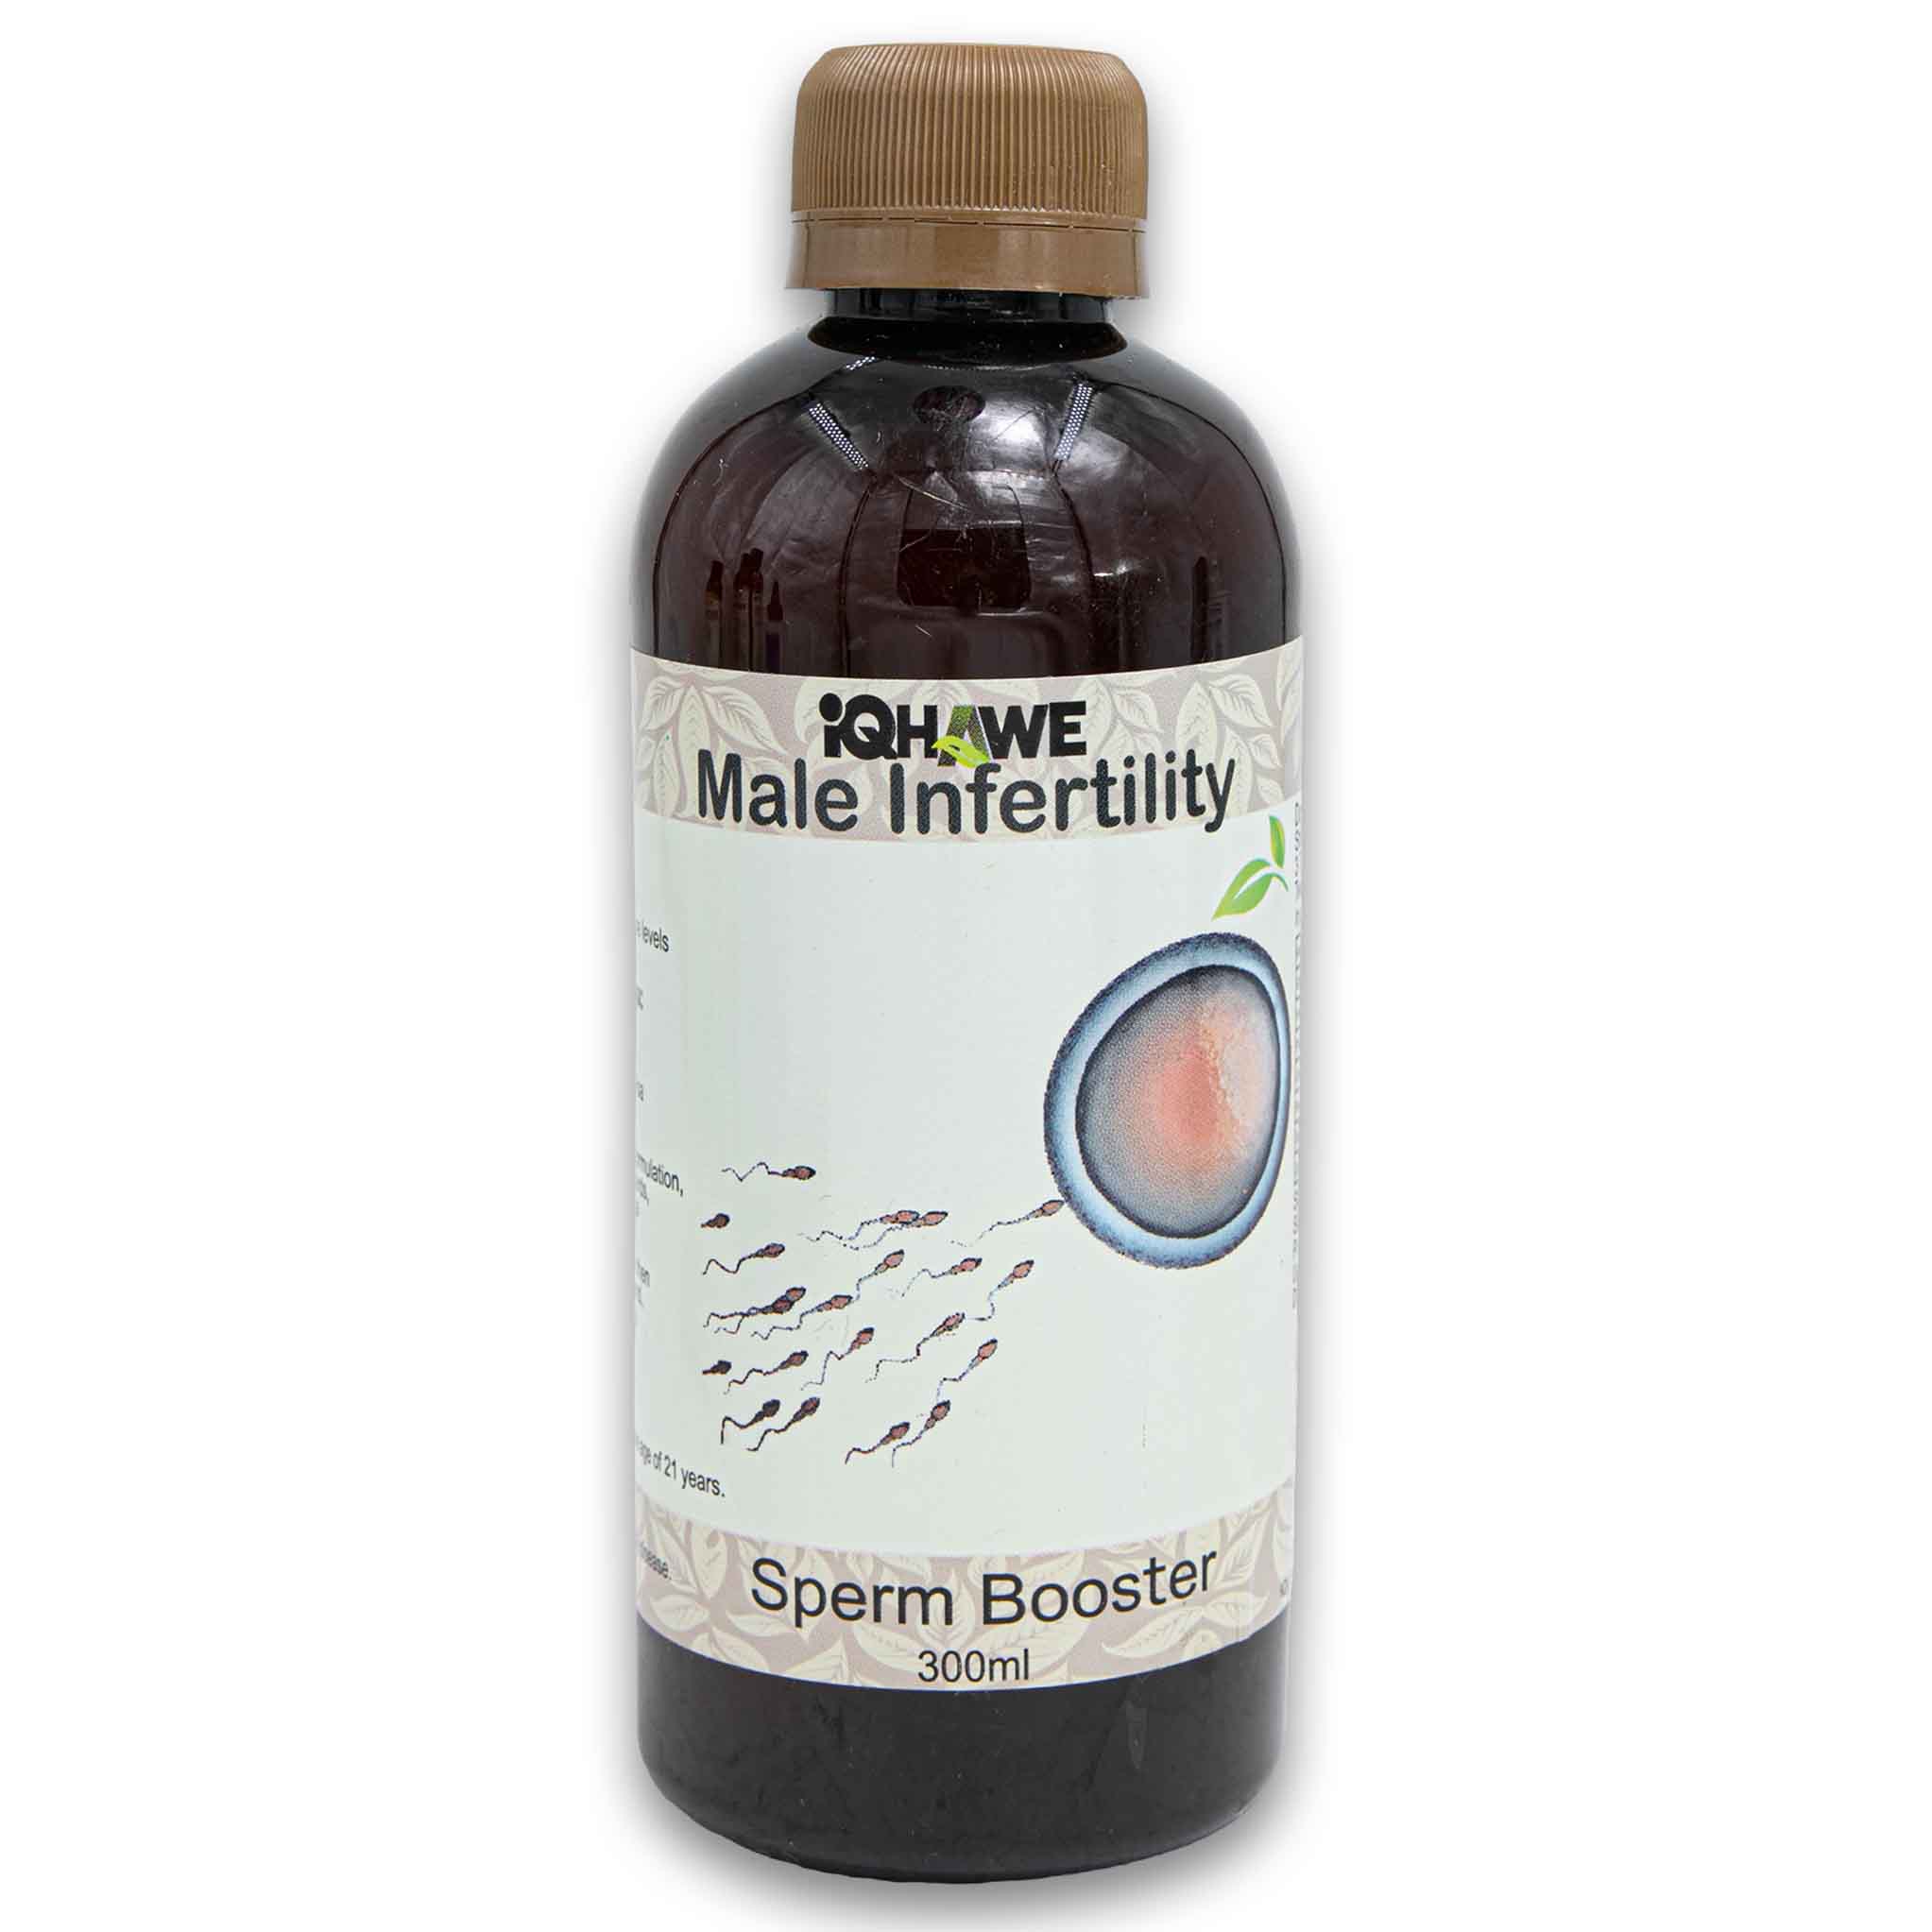 Male Infertility Sperm Booster 300ml Herbal Tonic Cosmetic Connection 